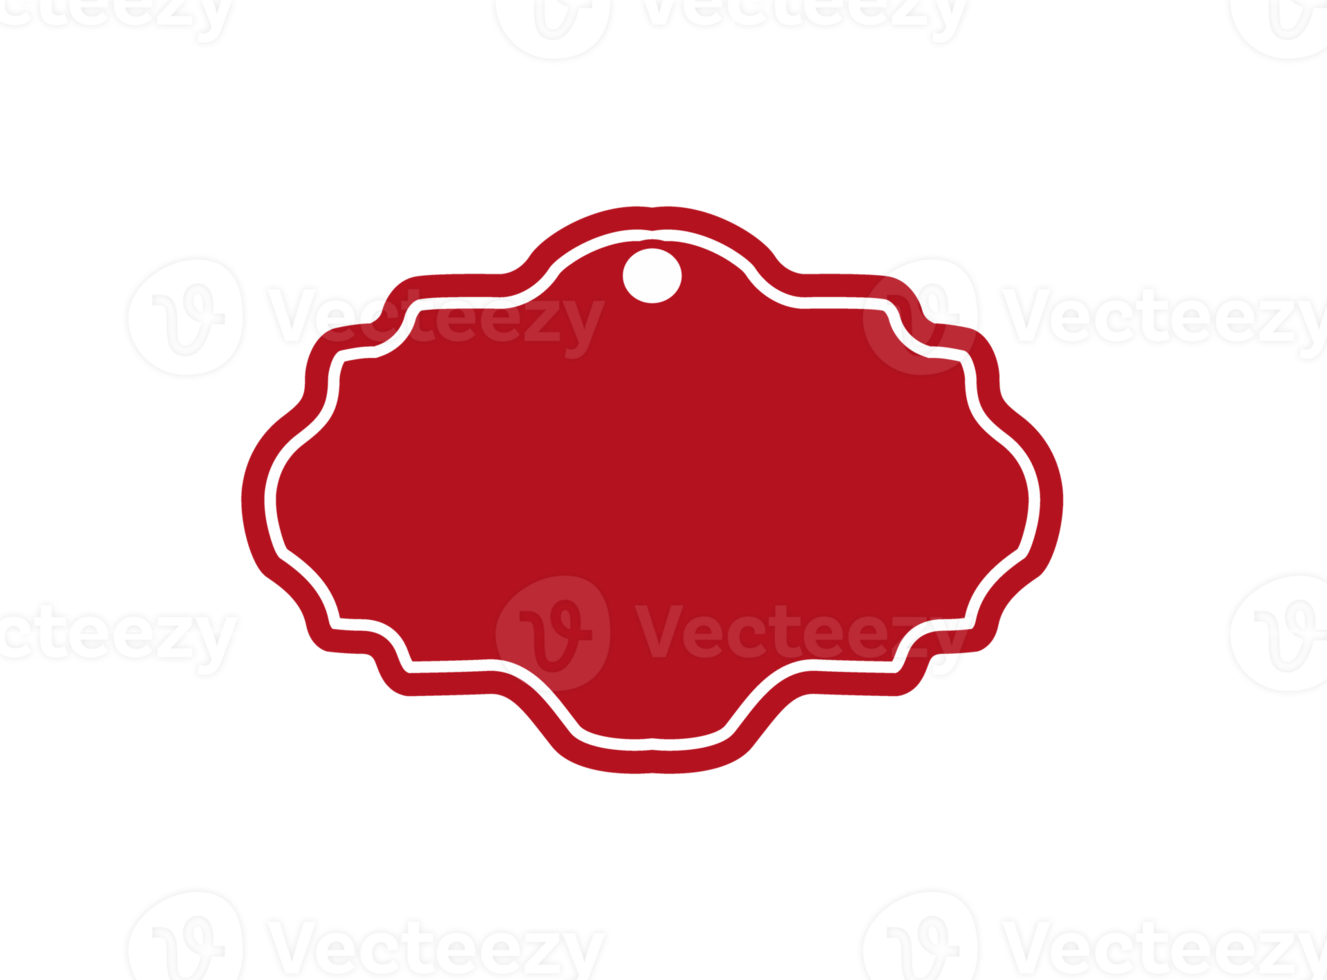 Red Blank Label with white outline png